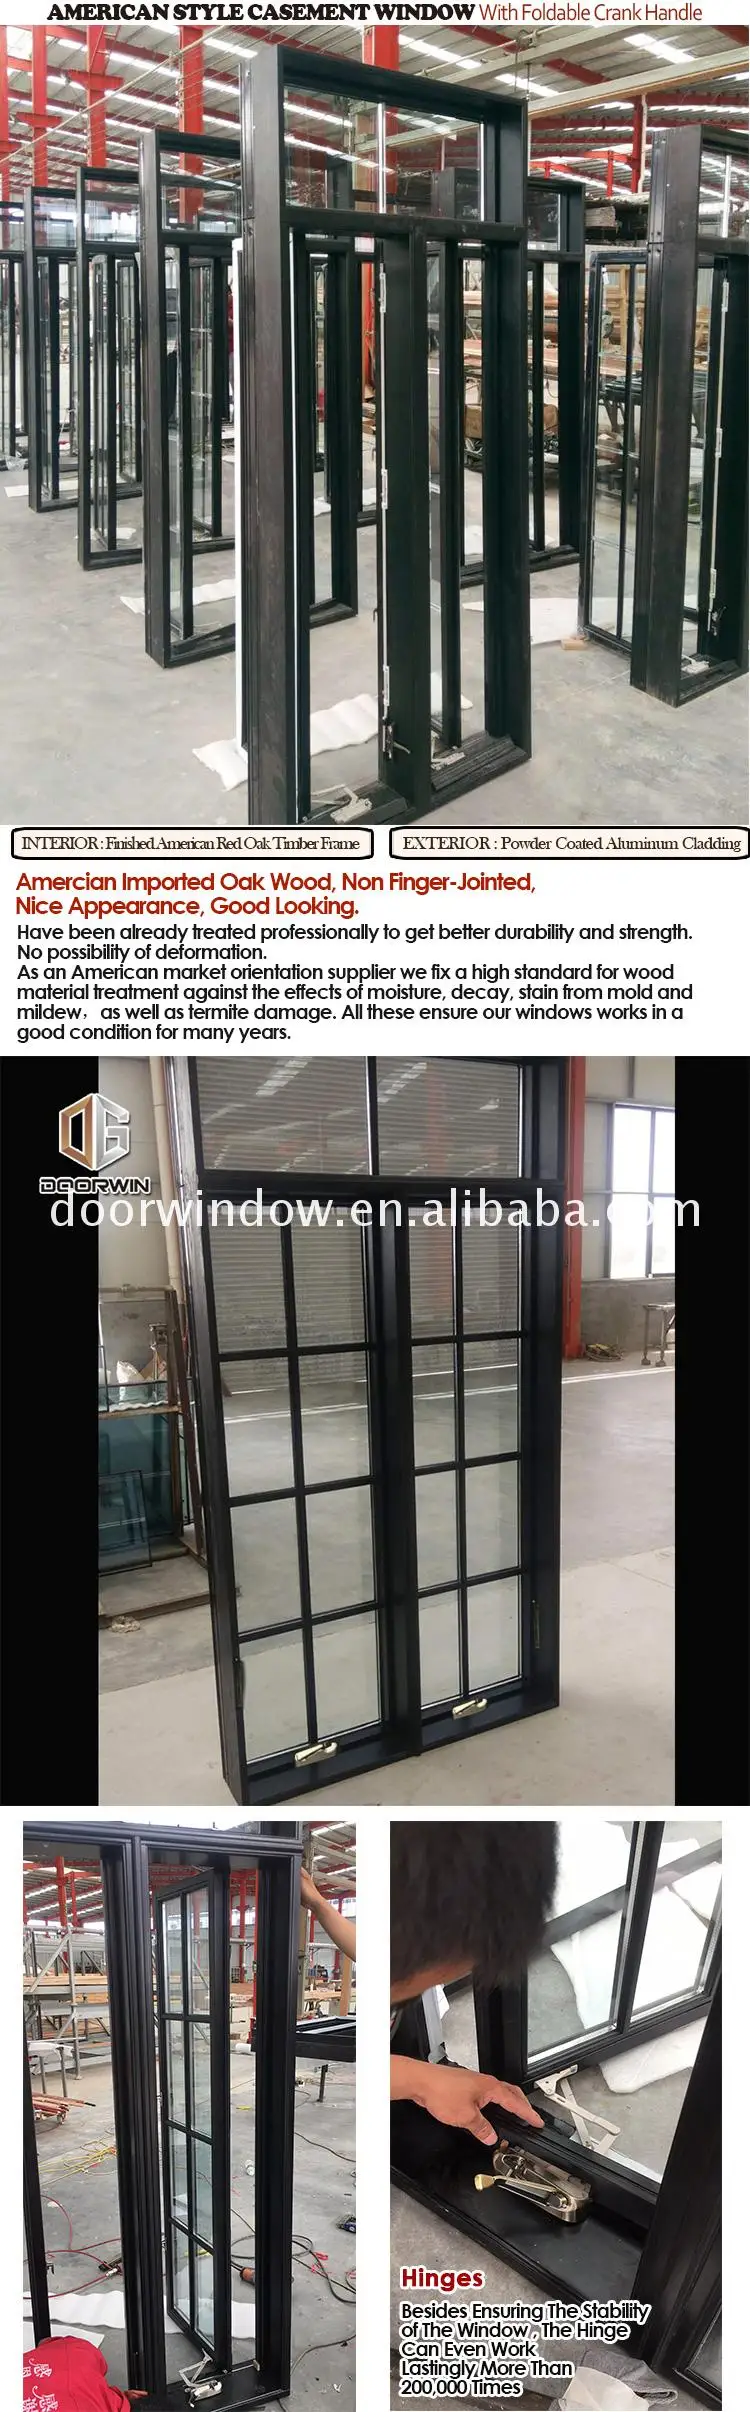 Wooden design for window wood windows frame and doors